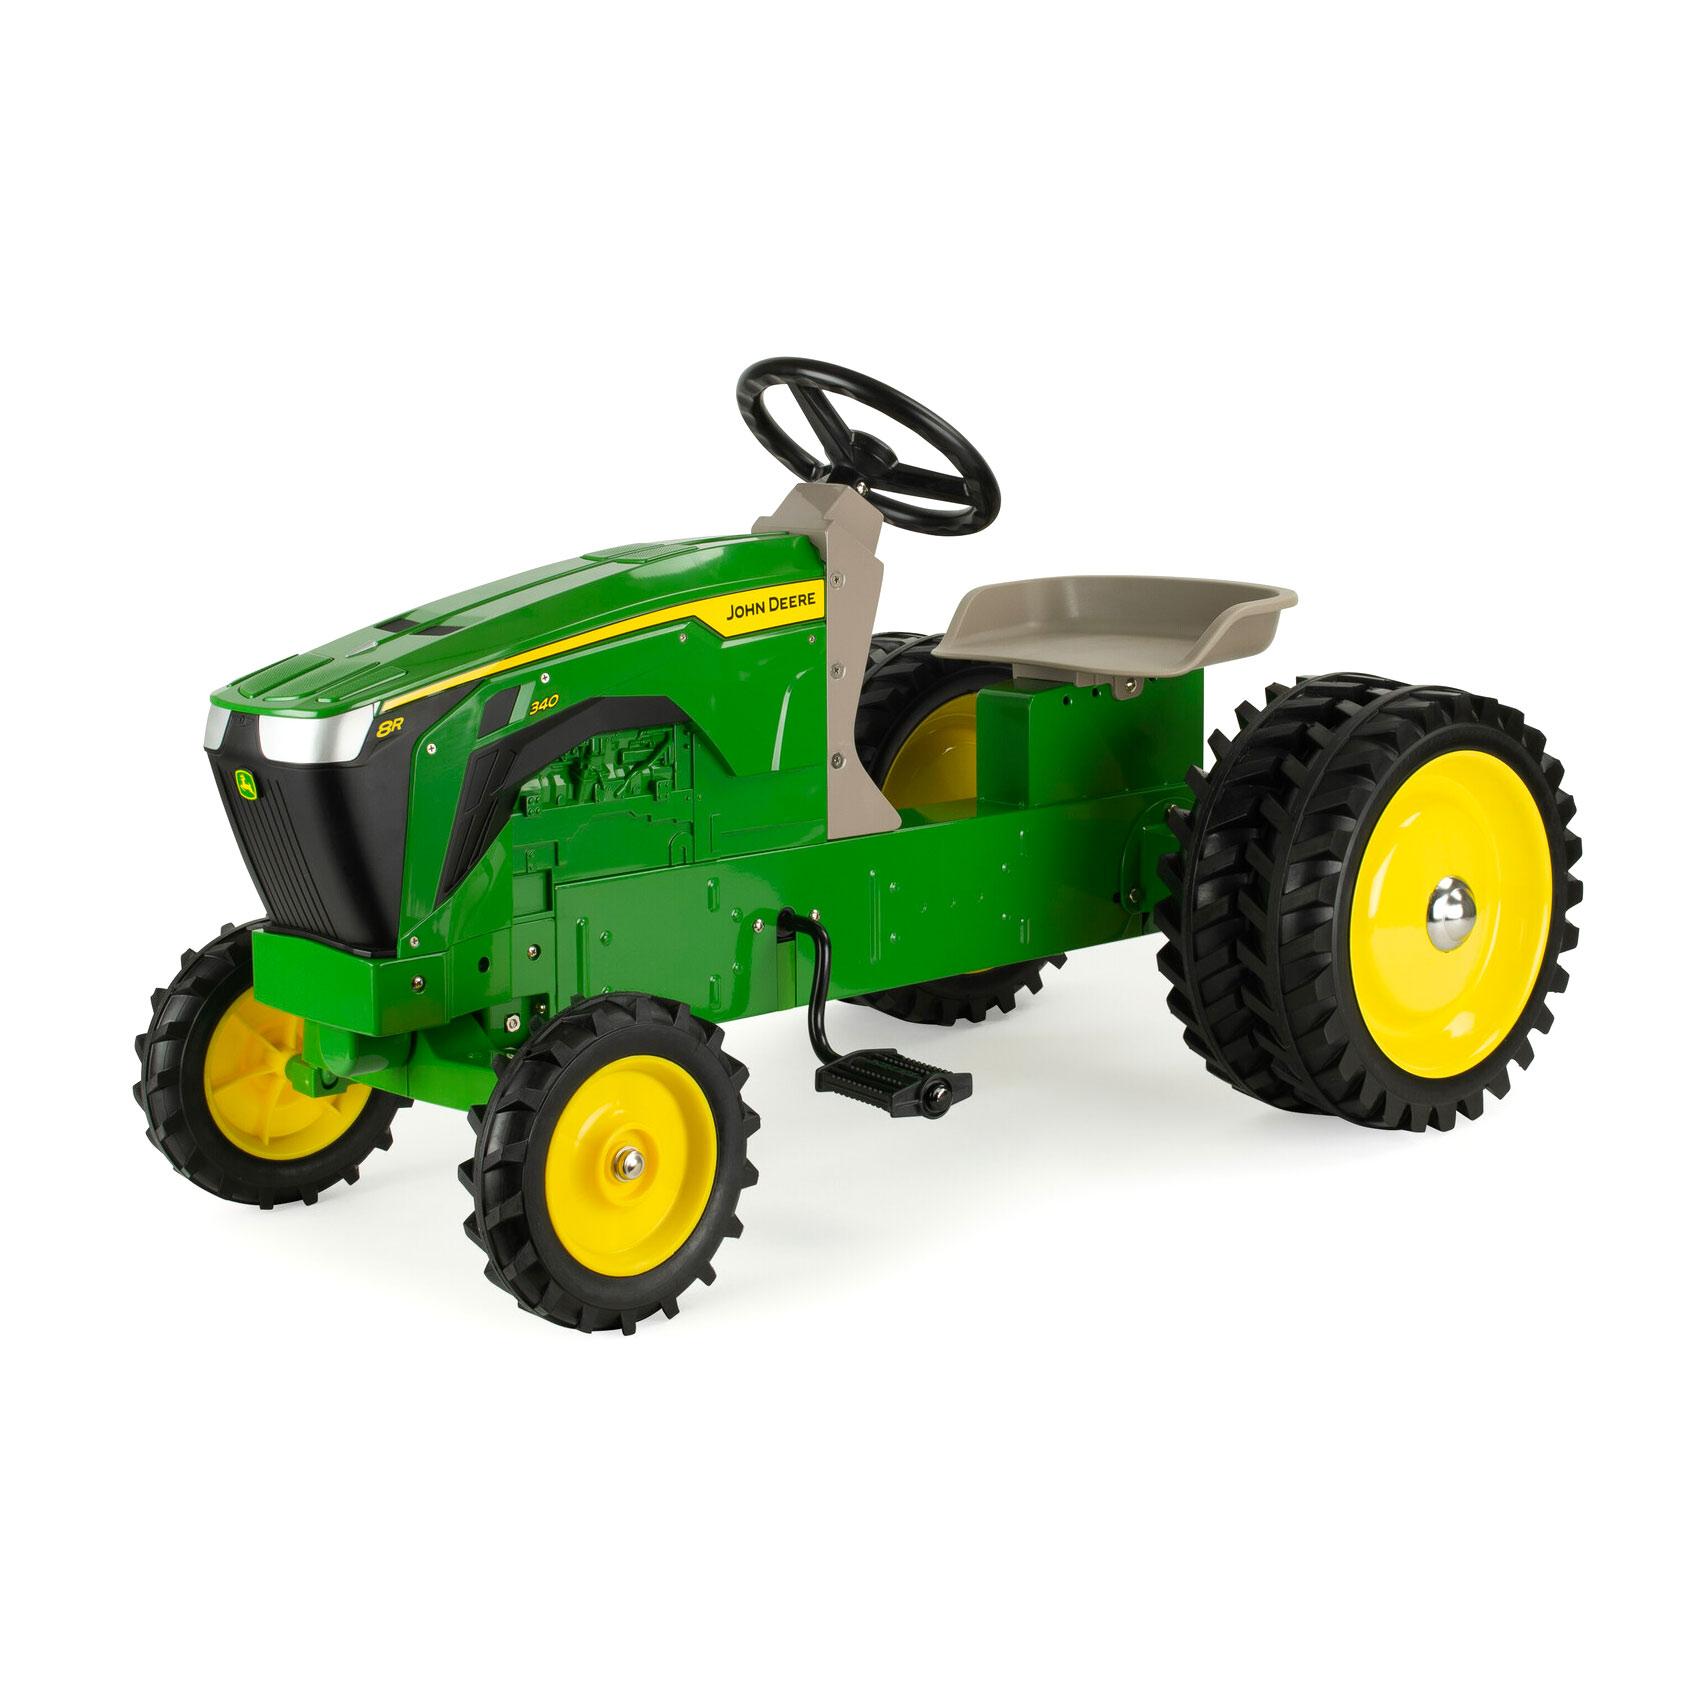 #45956 John Deere 8R 340 Pedal Tractor with Rear Duals